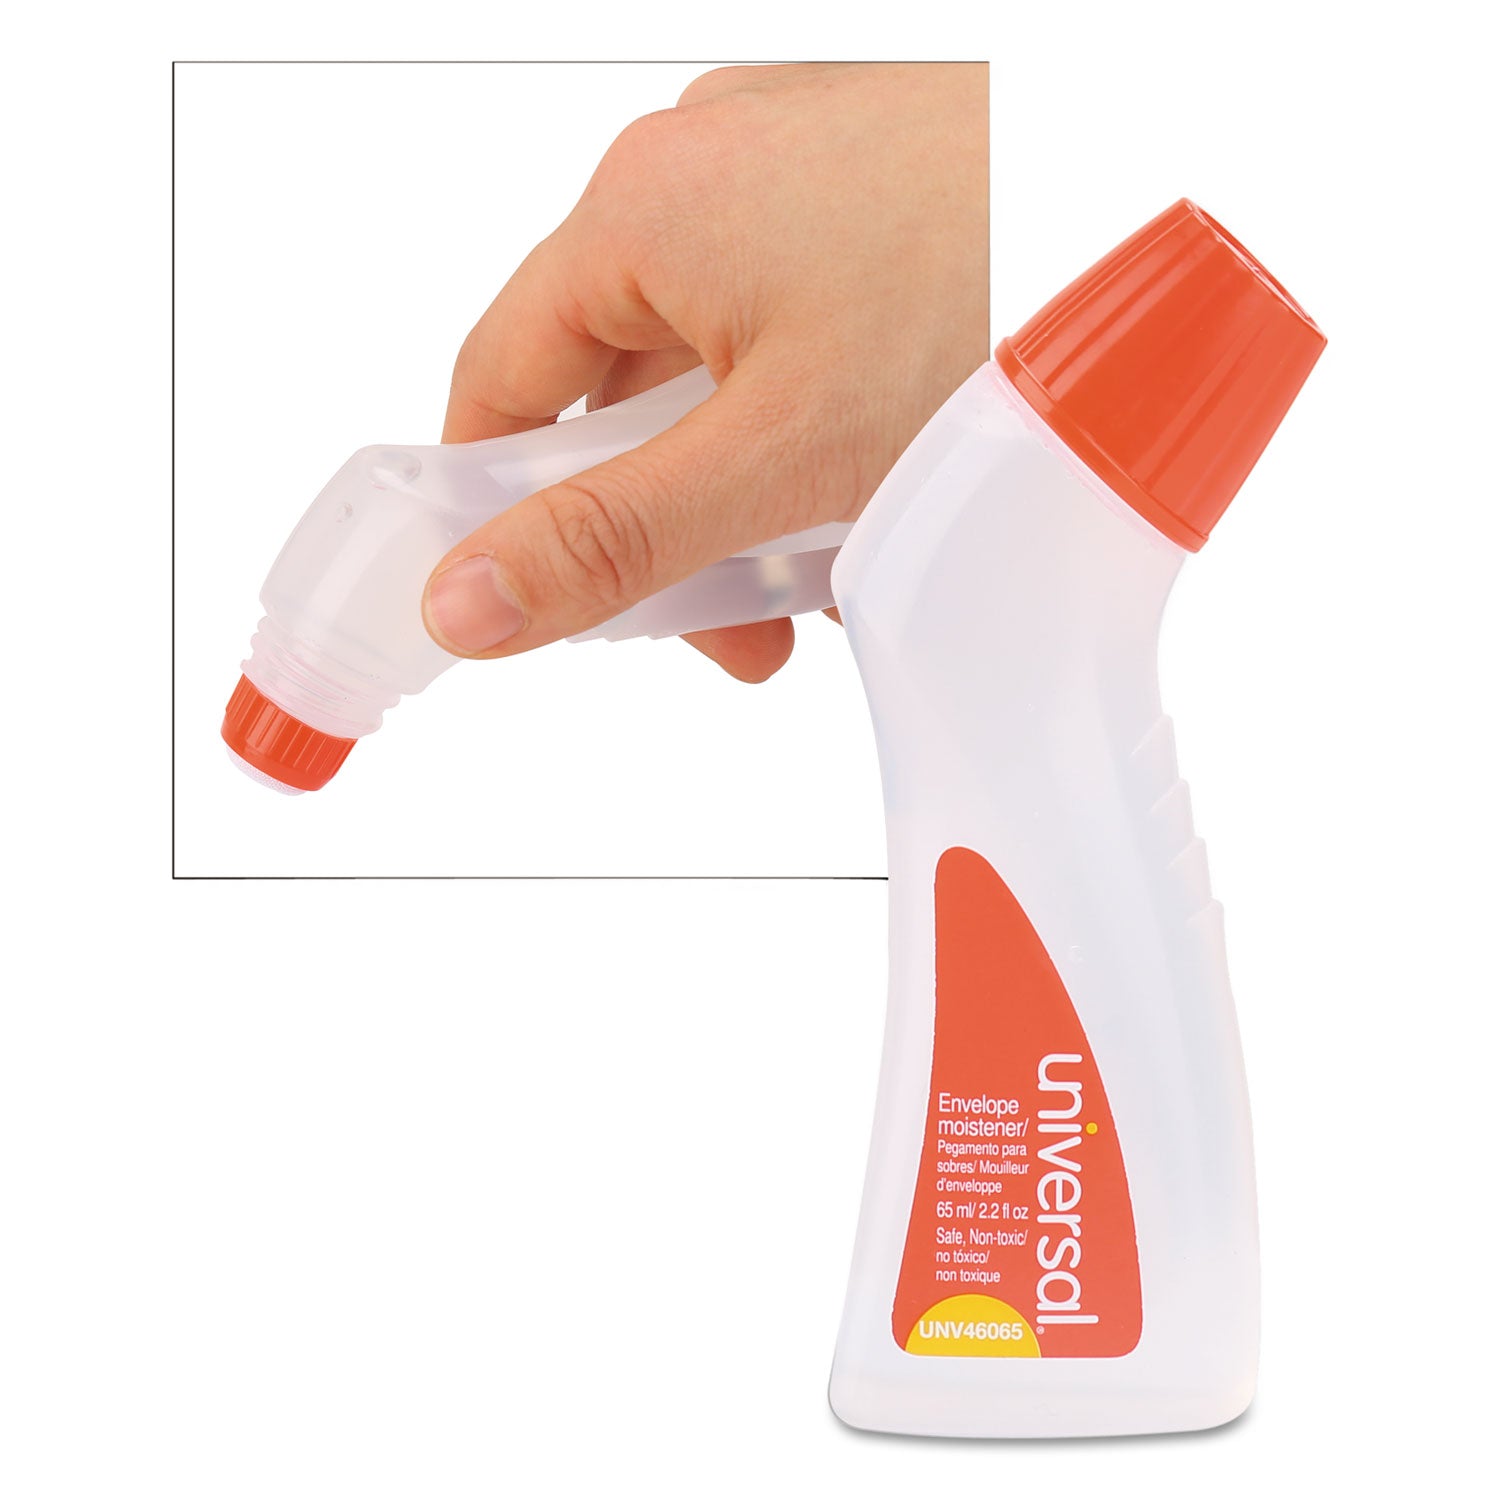 envelope-moistener-with-adhesive-22-oz-bottle-clear_unv46065 - 2